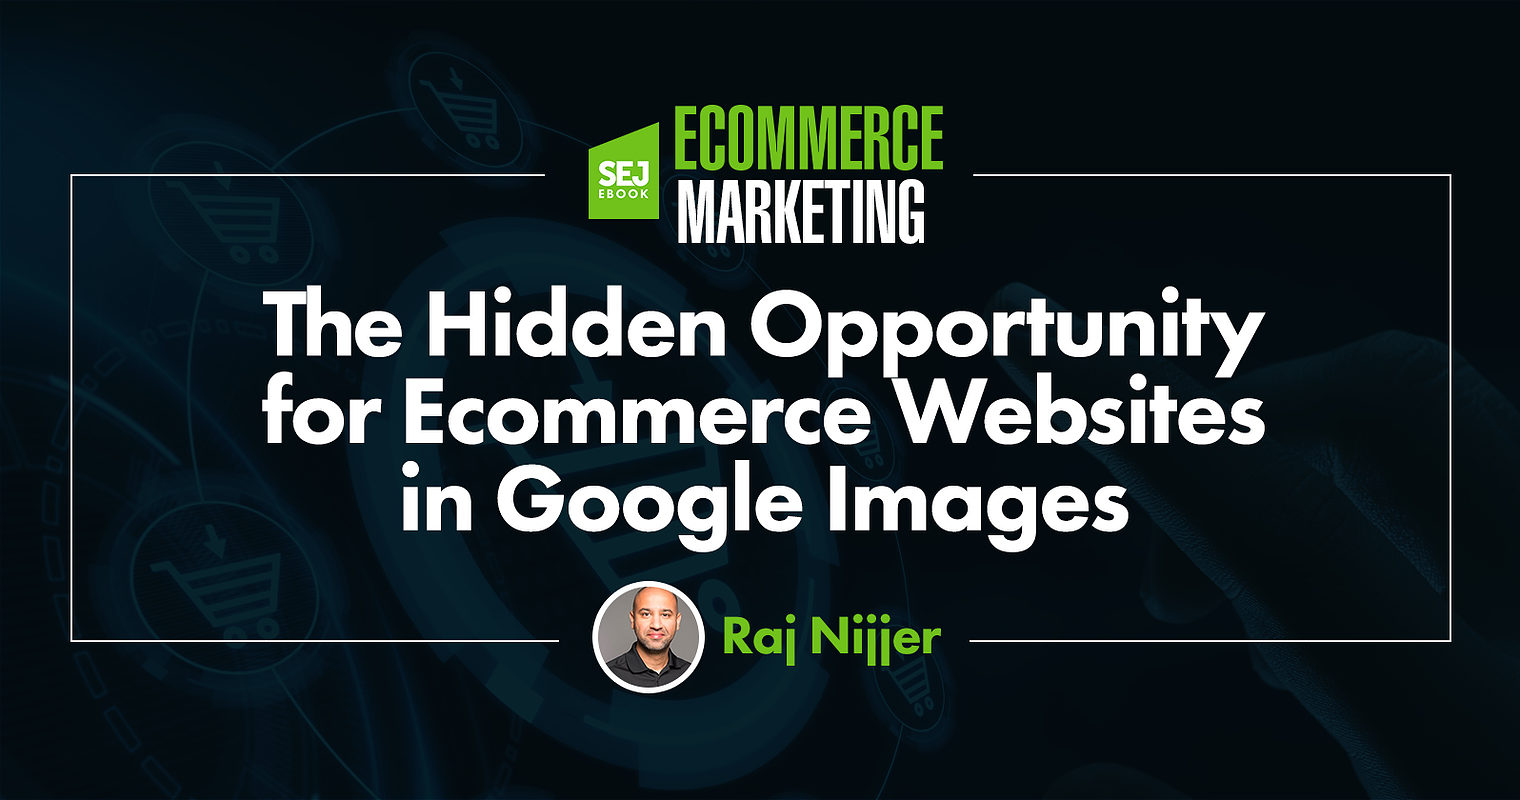 The Hidden Opportunity for Ecommerce Websites in Google Images